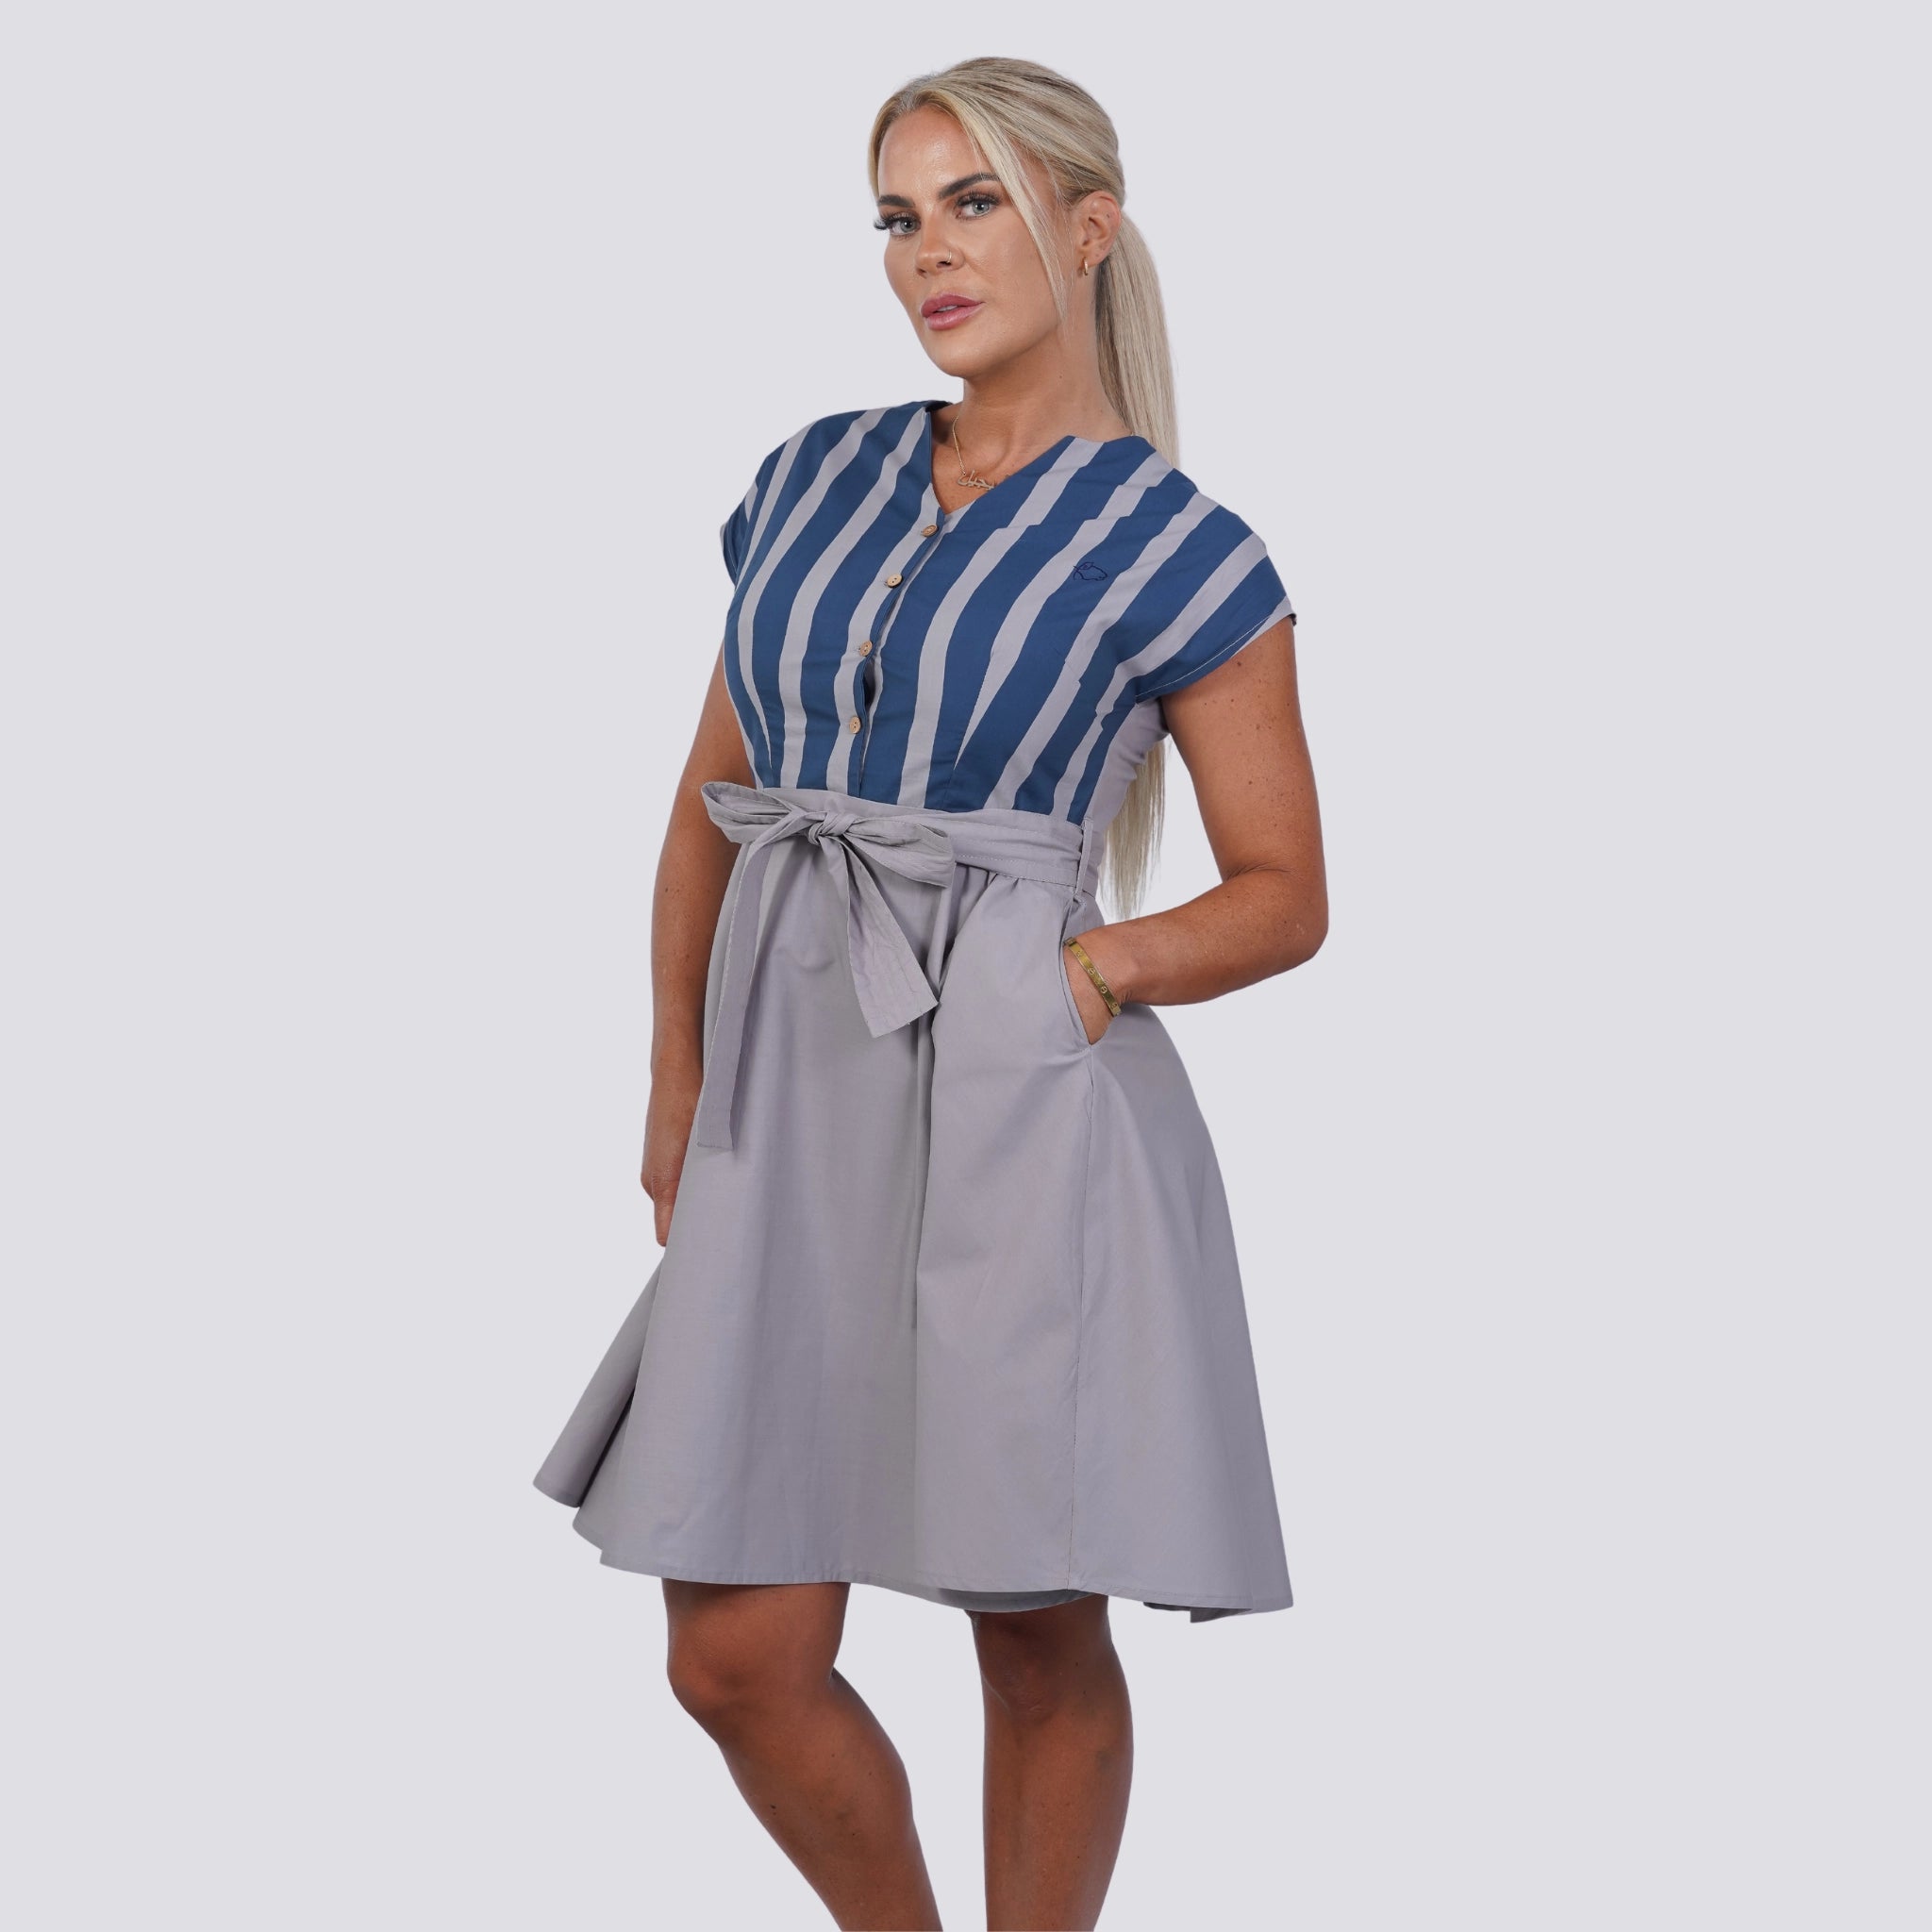 A woman stands wearing the Karee Embrace Coastal Chic with Sustainability: Navy Nights Golden Palm Leaves Linen Shirt Dress, paired with a gray knee-length skirt tied with a bow. She has her hair pulled back and her hands in her skirt pockets, embodying the essence of a sustainable wardrobe.